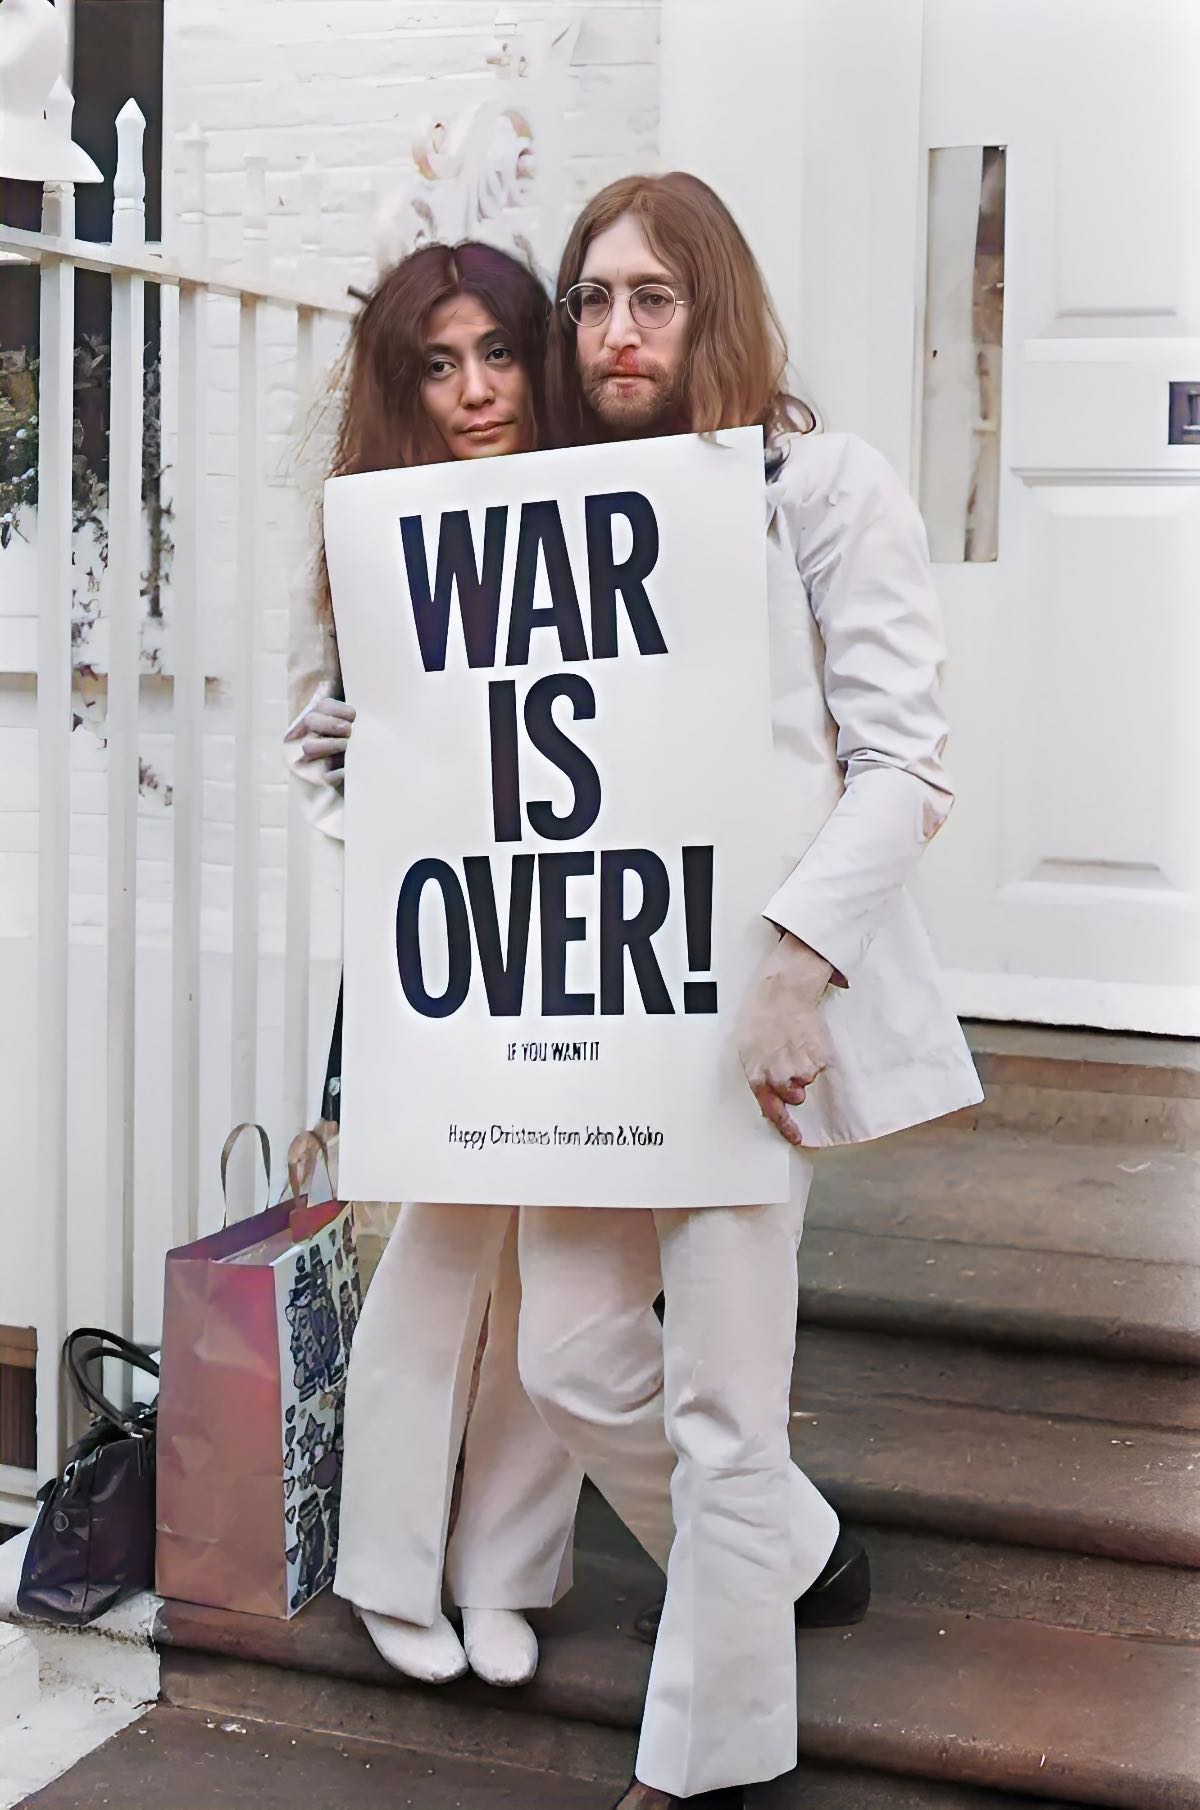 John Lennon and Yoko Ono with a sign saying “WAR IS OVER! IF YOU WANT IT Happy Christmas from John & Yoko”